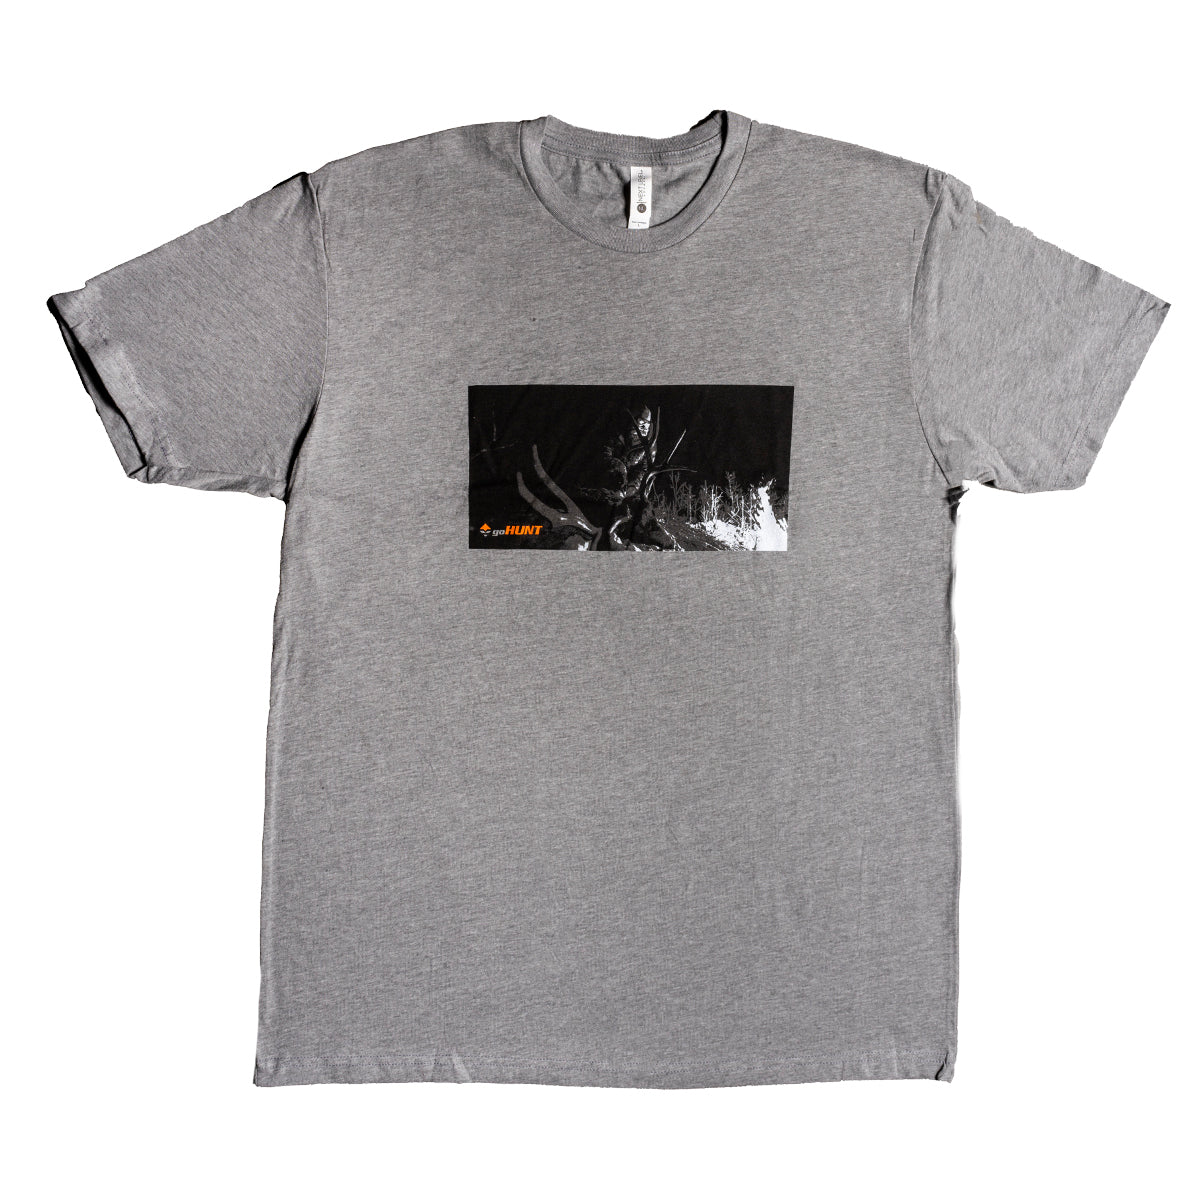 GOHUNT Colorado Buck T-Shirt - The Photo Series in  by GOHUNT | GOHUNT - GOHUNT Shop